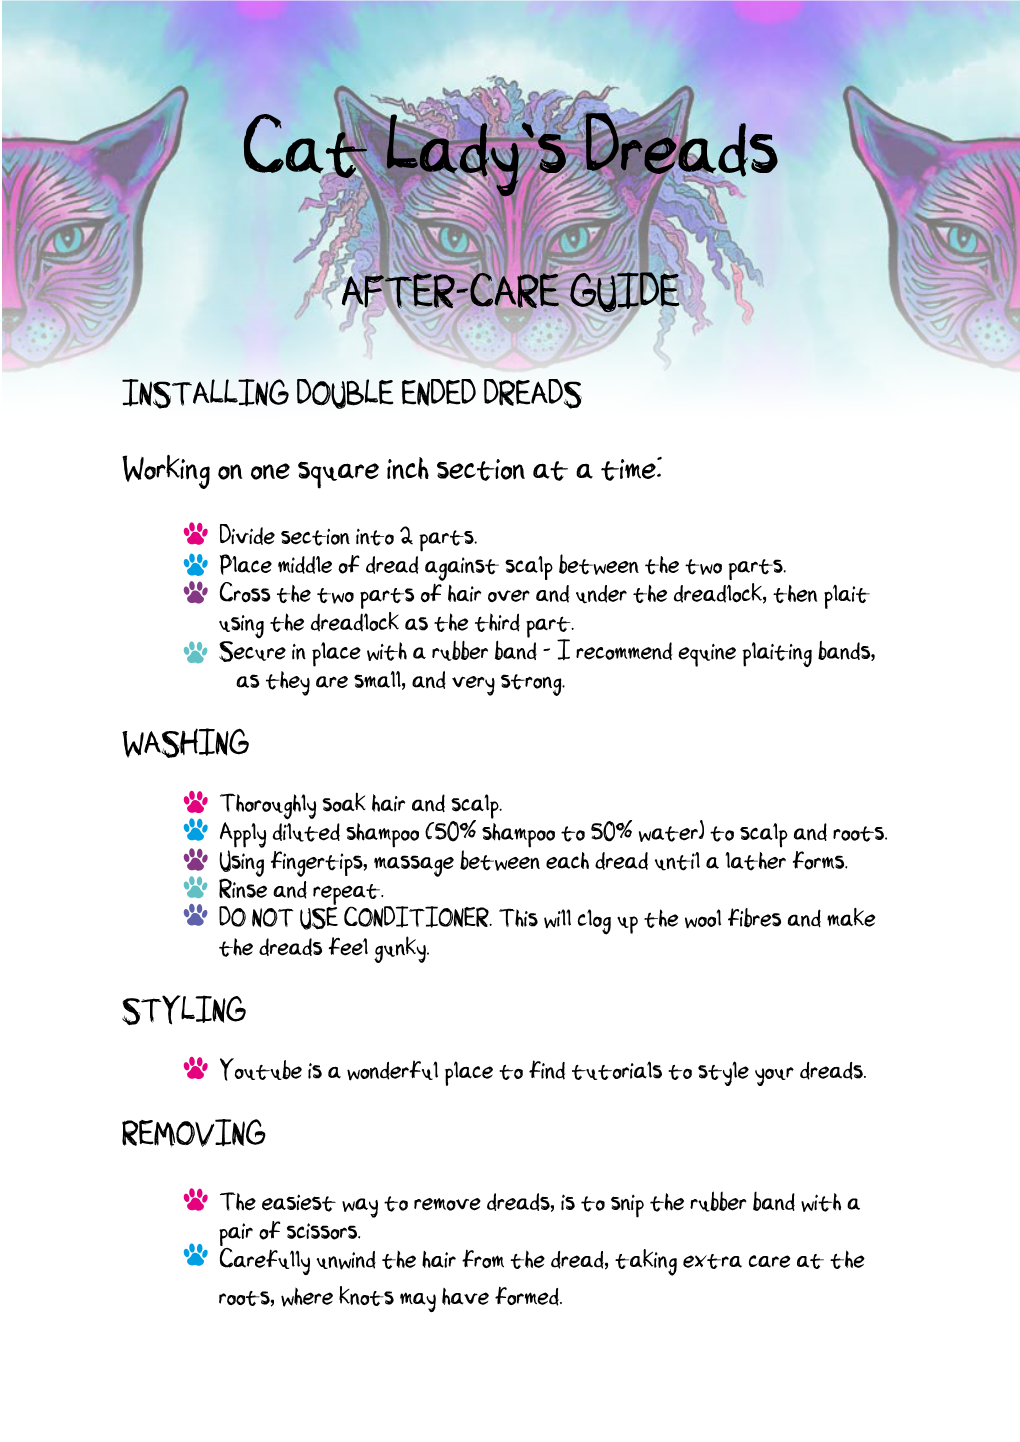 After-Care Guide